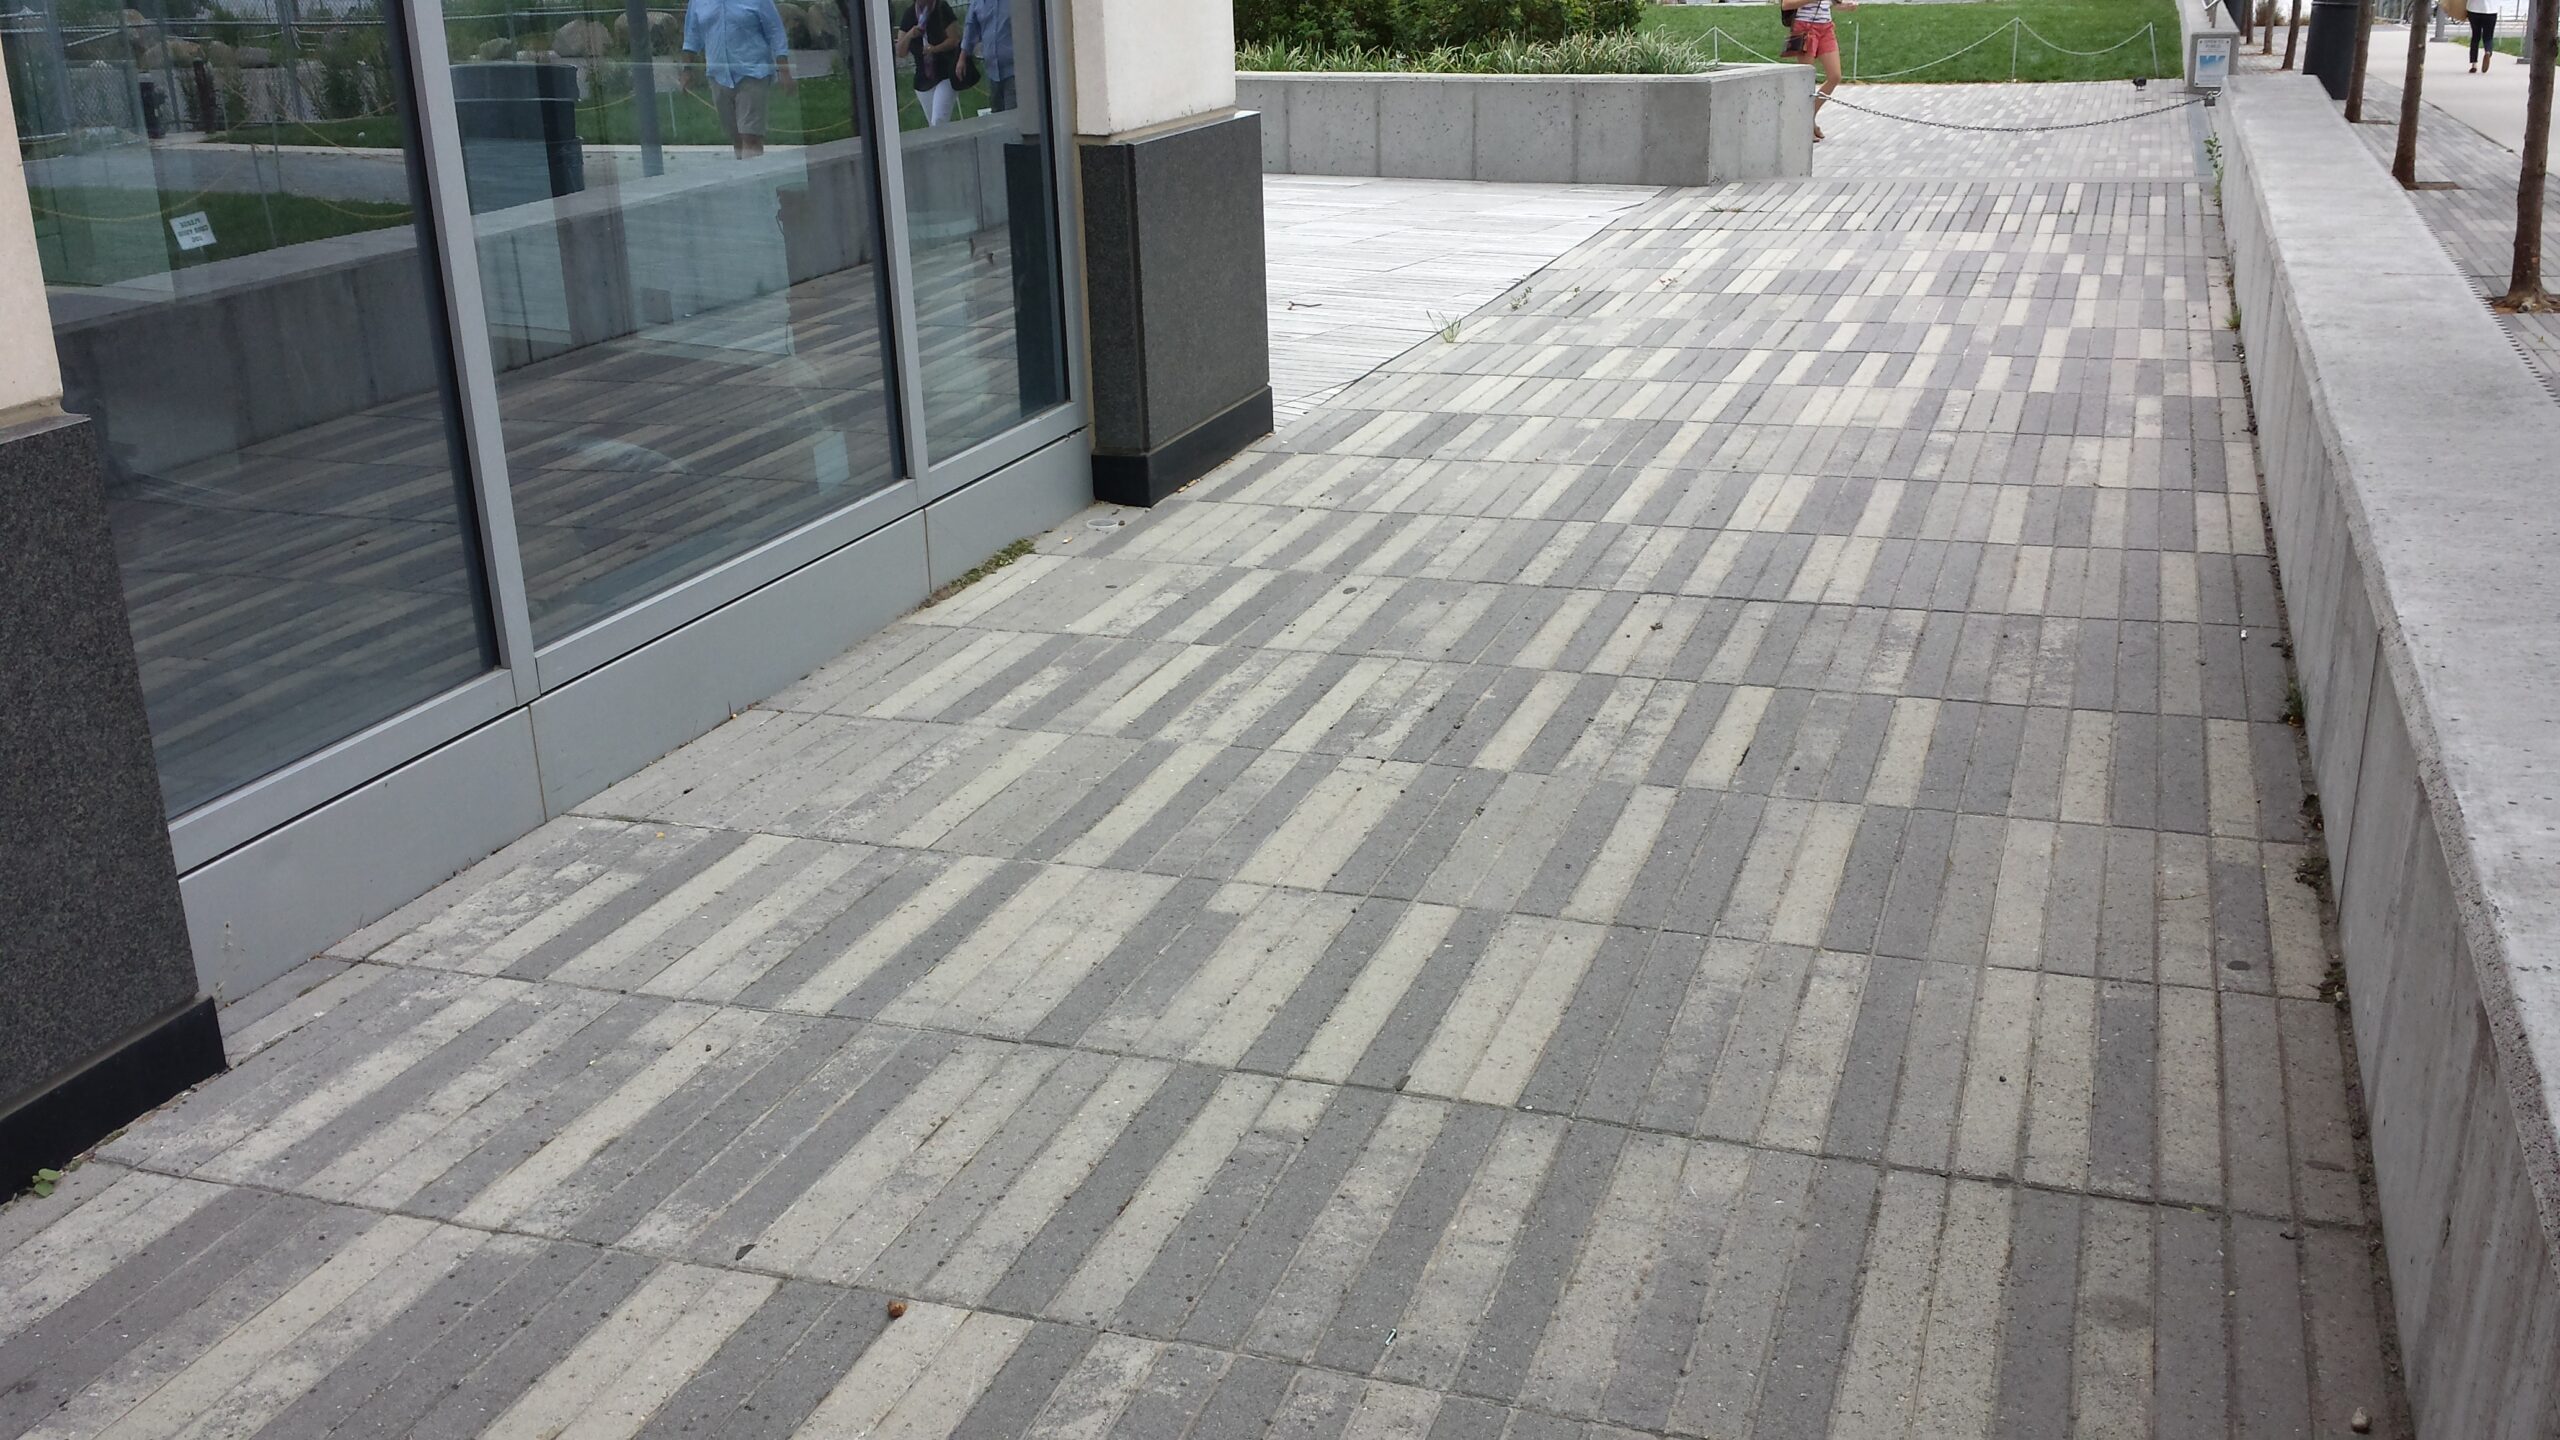 All about Concrete Pavers